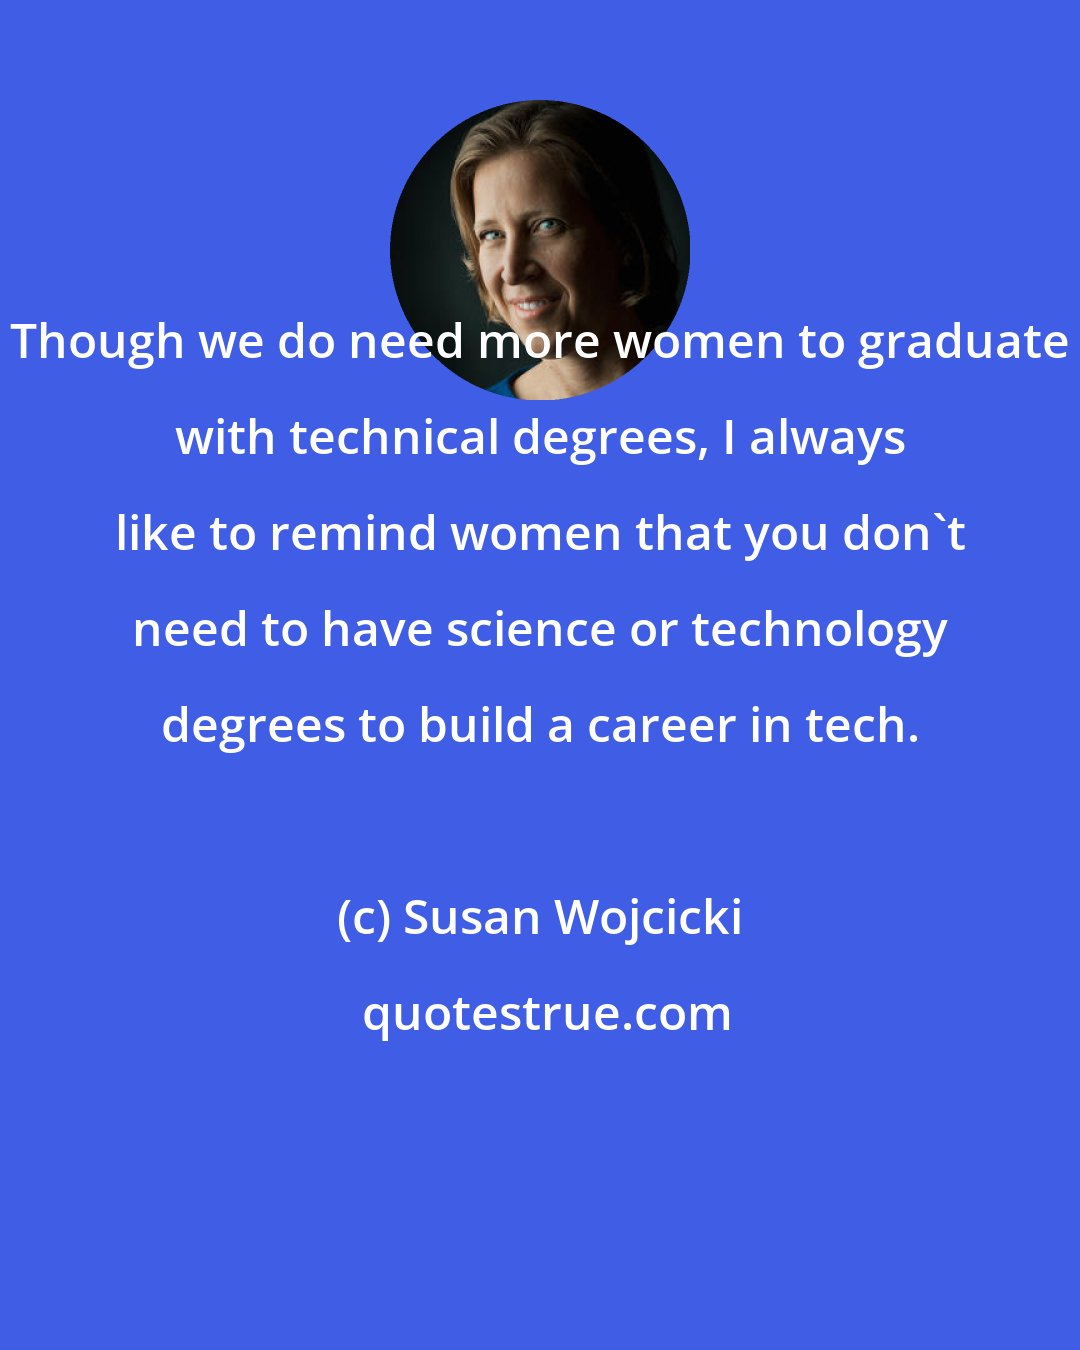 Susan Wojcicki: Though we do need more women to graduate with technical degrees, I always like to remind women that you don't need to have science or technology degrees to build a career in tech.